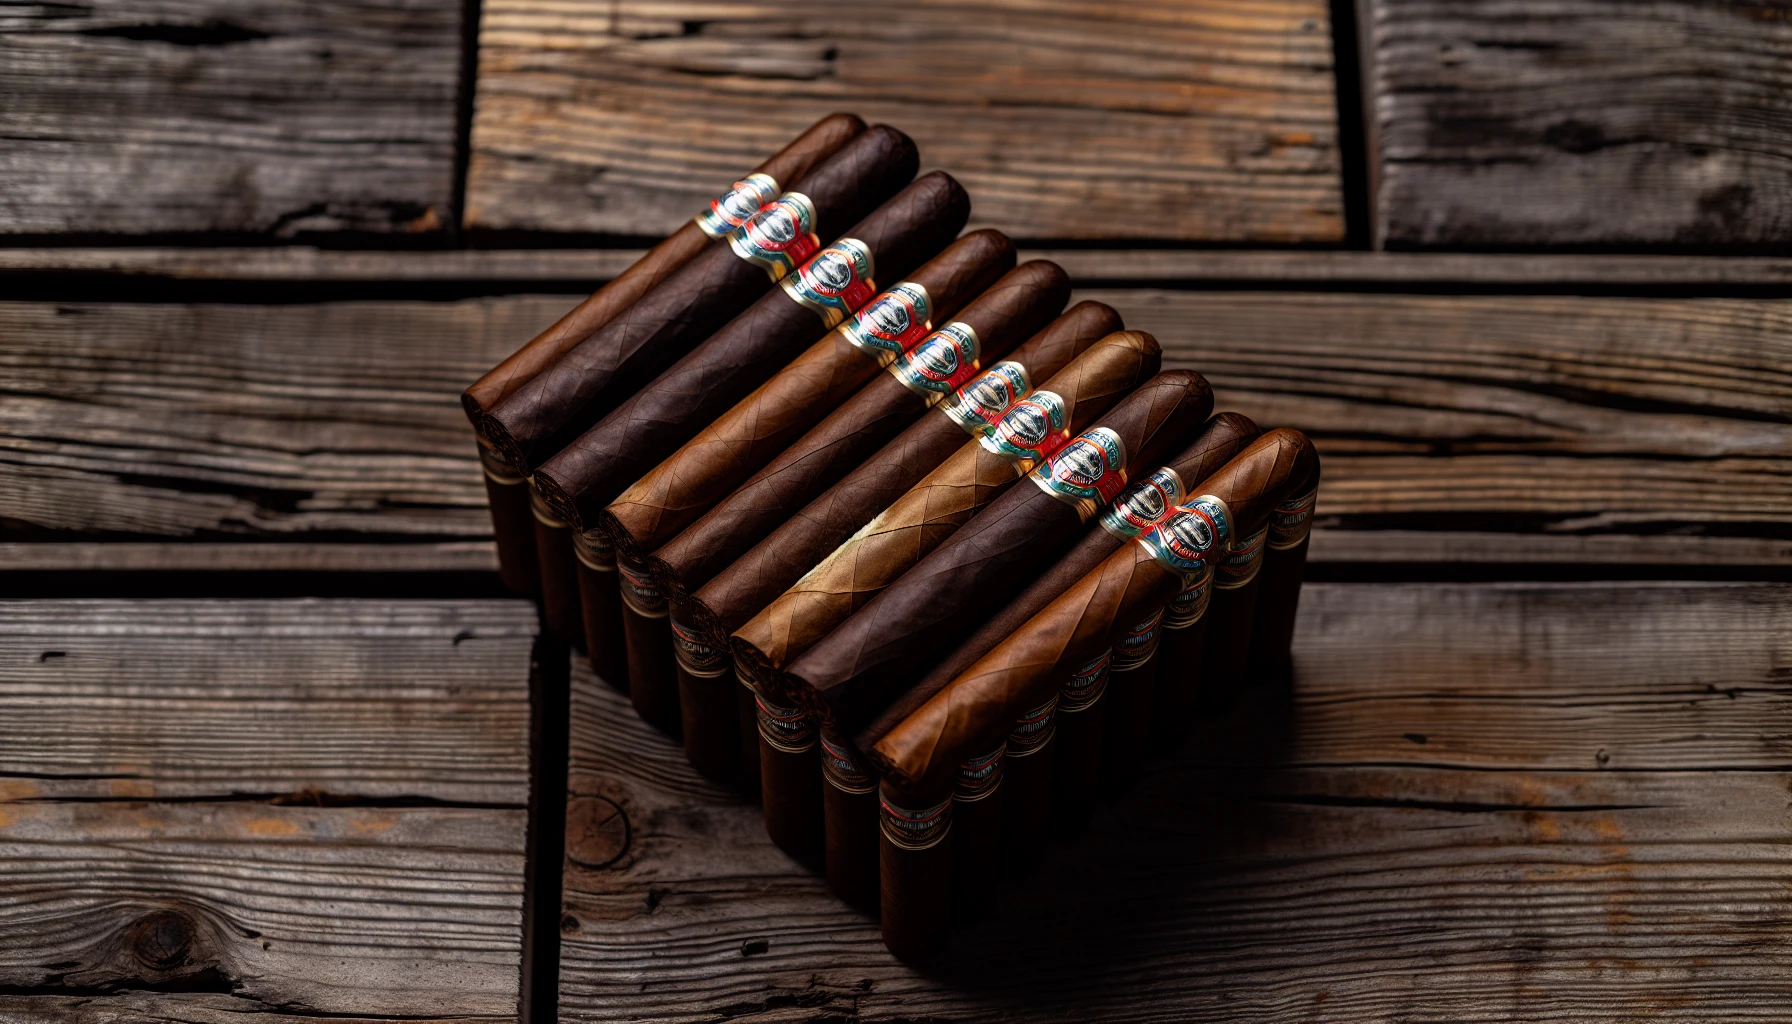 Assortment of New World Cameroon cigars displayed on a wooden table